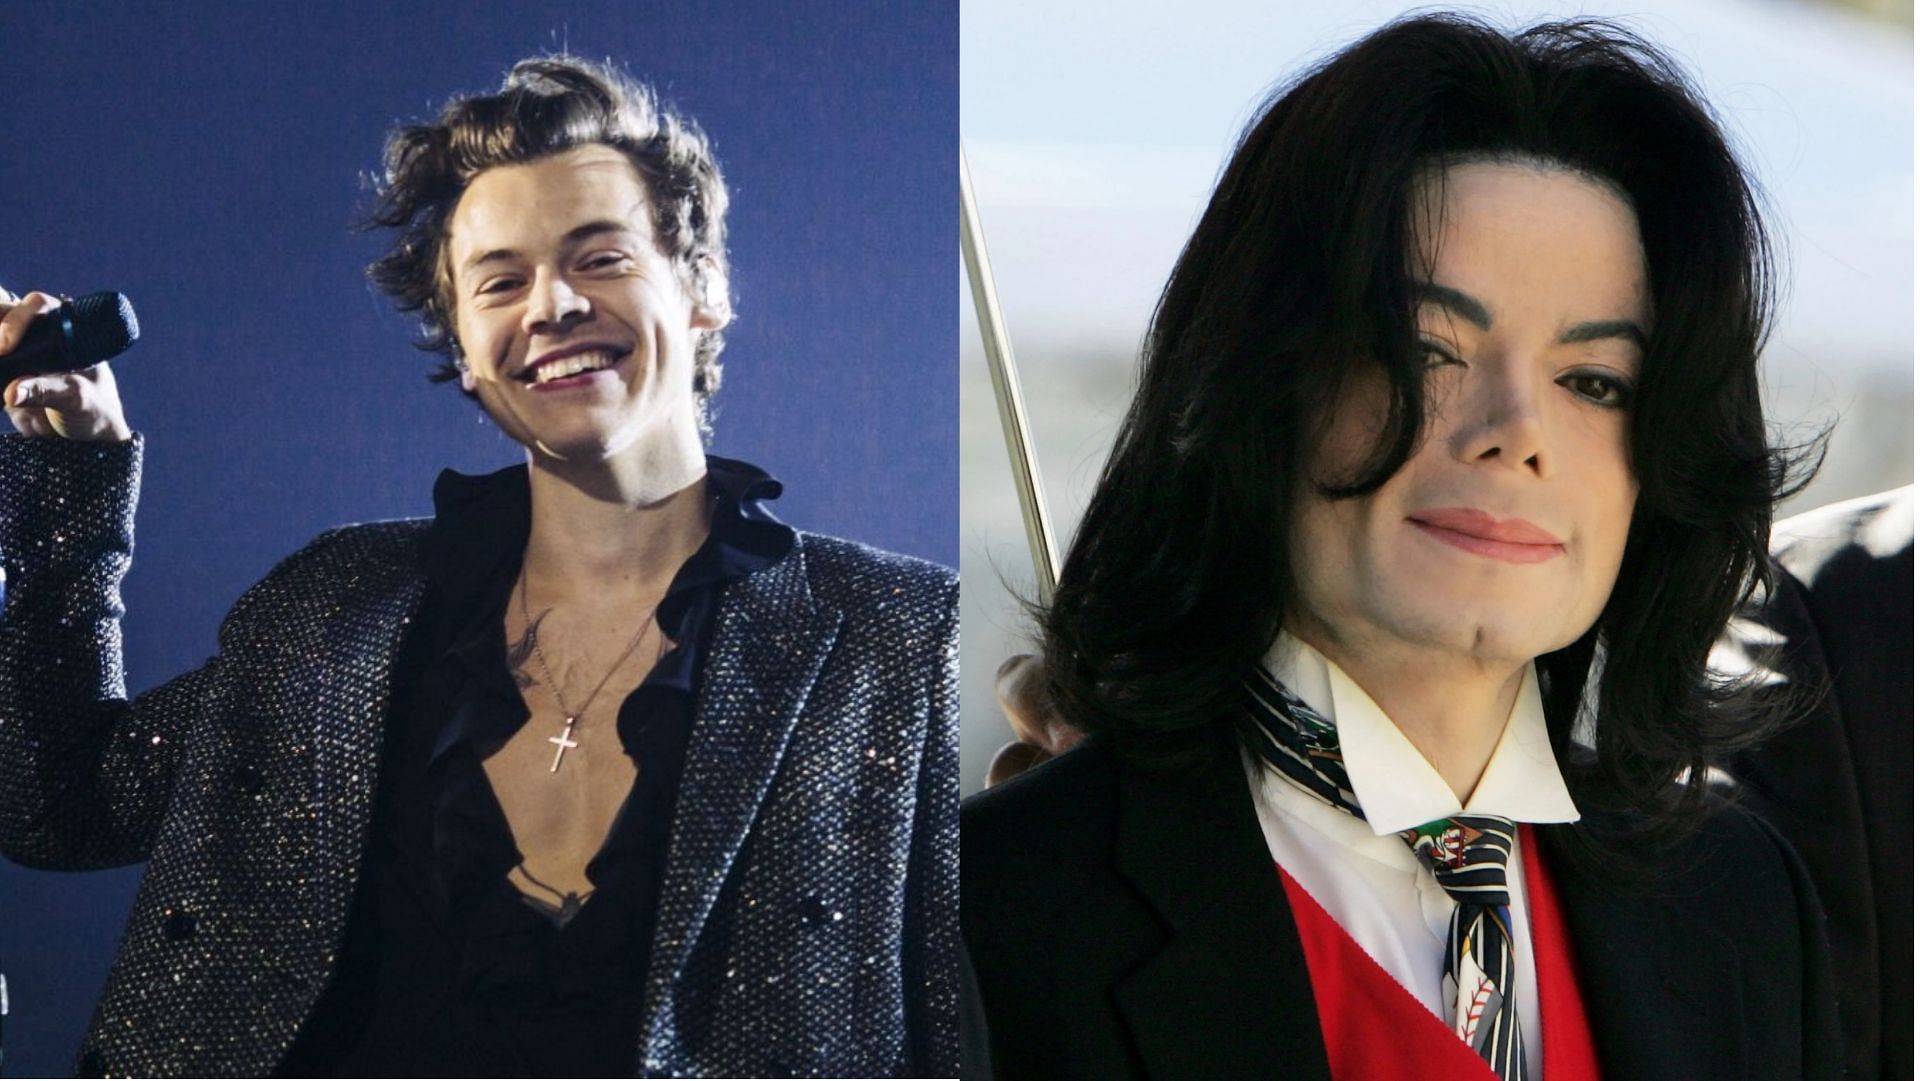 Harry Styles and Michael Jackson (Image via Helene Marie Pambrun/Getty Images, and Justin Sullivan/Getty Images)